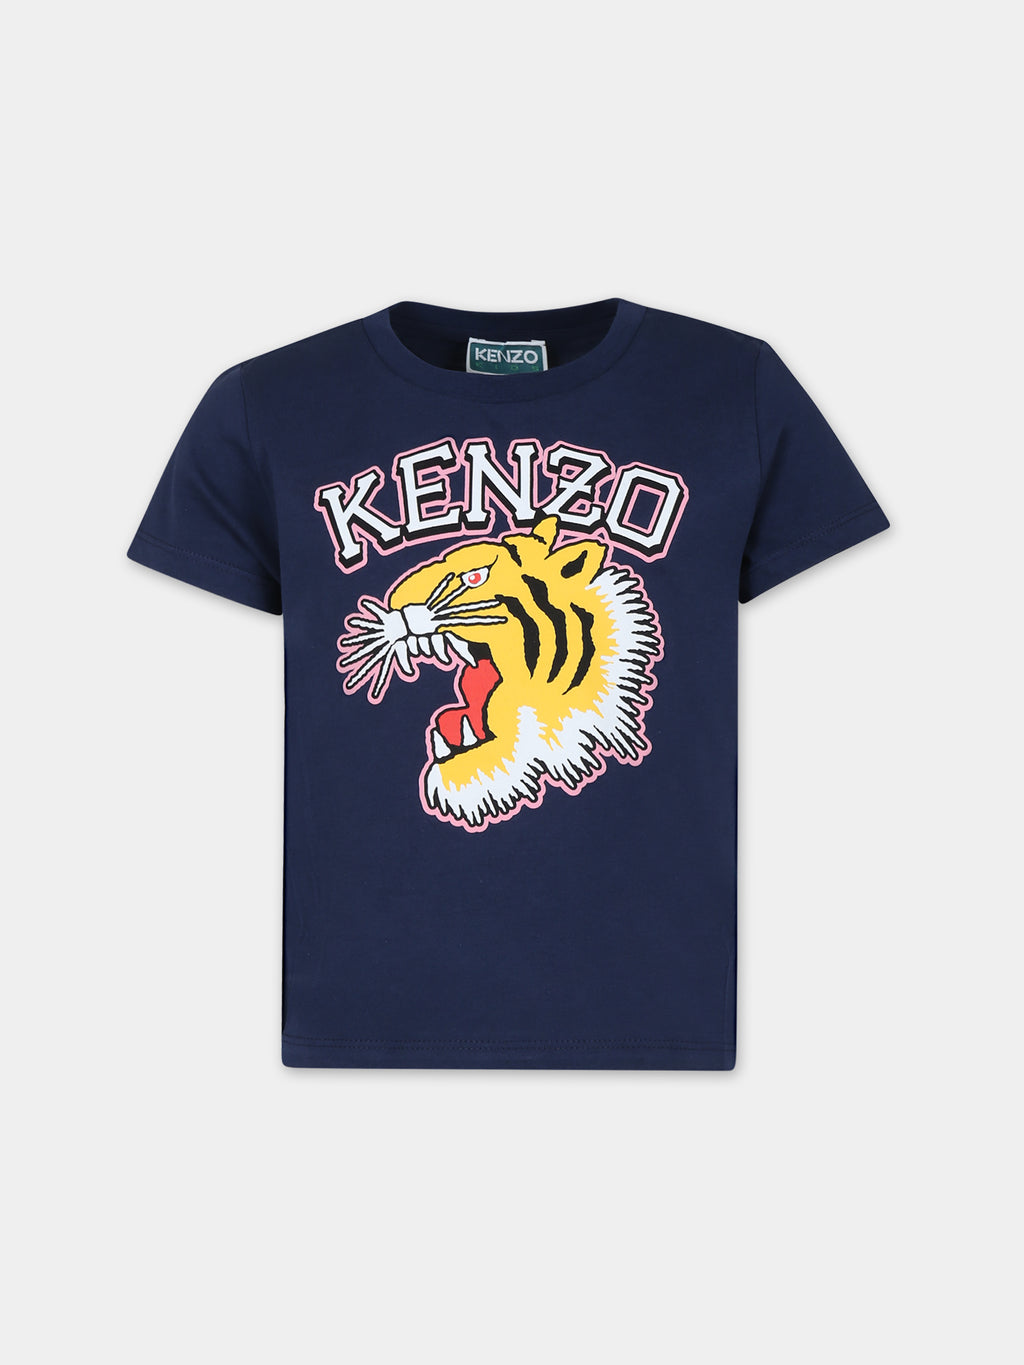 Blue t-shirt for girl with iconic tiger and logo